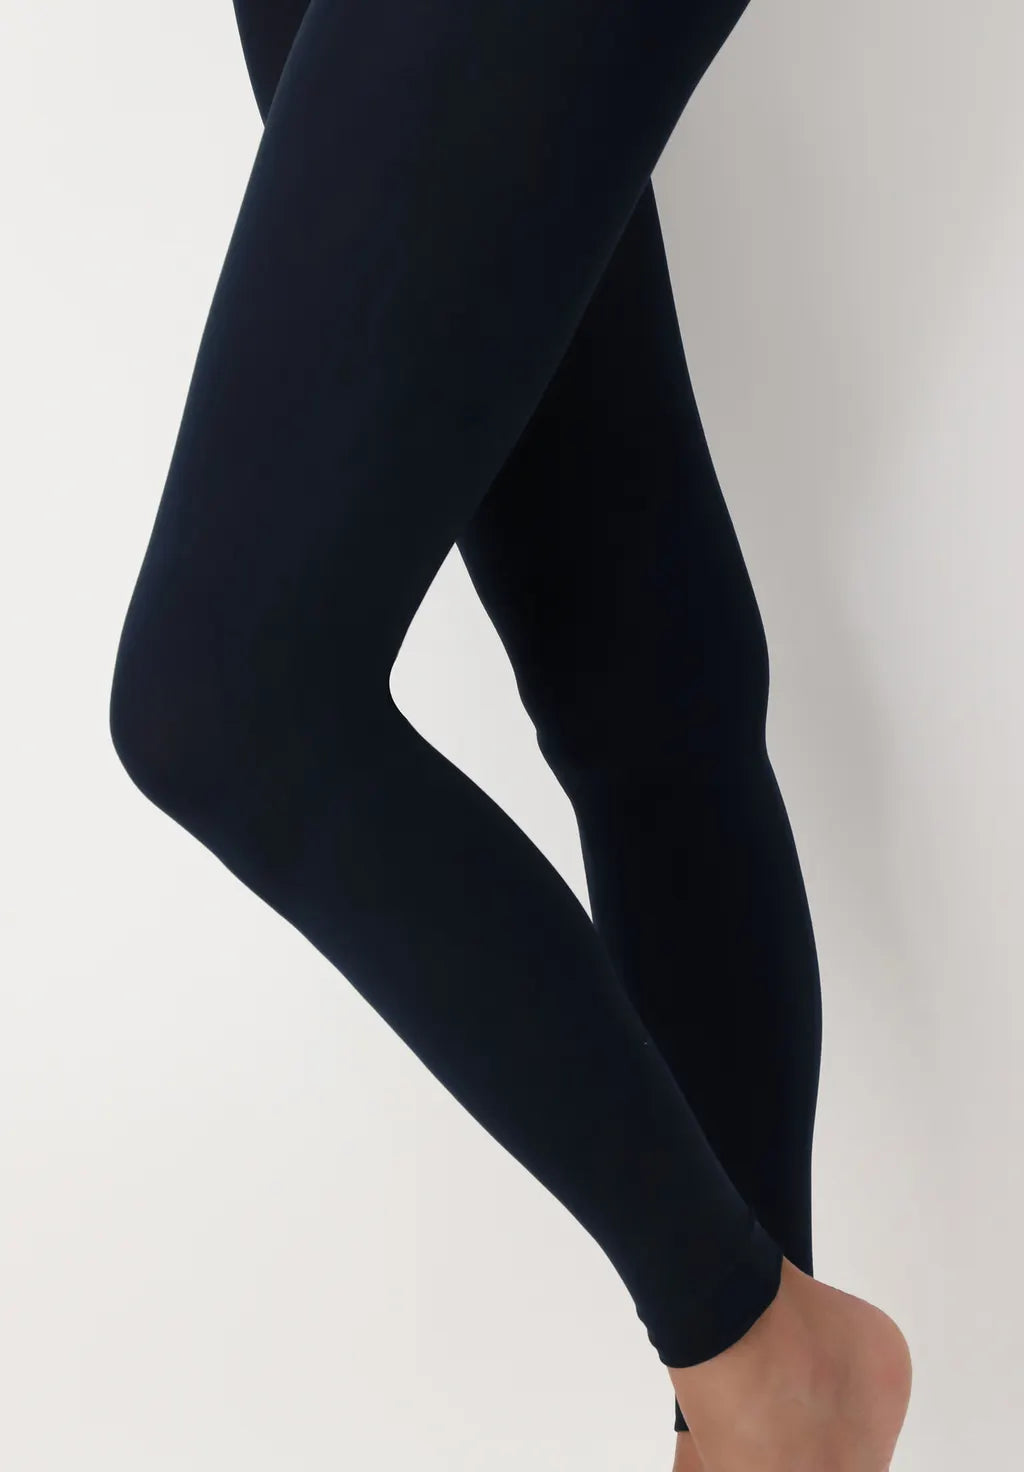 OroblÌ_ All Colors 120 Leggings - Navy blue ultra opaque soft matte footless tights with flat seams, gusset and deep waist band.